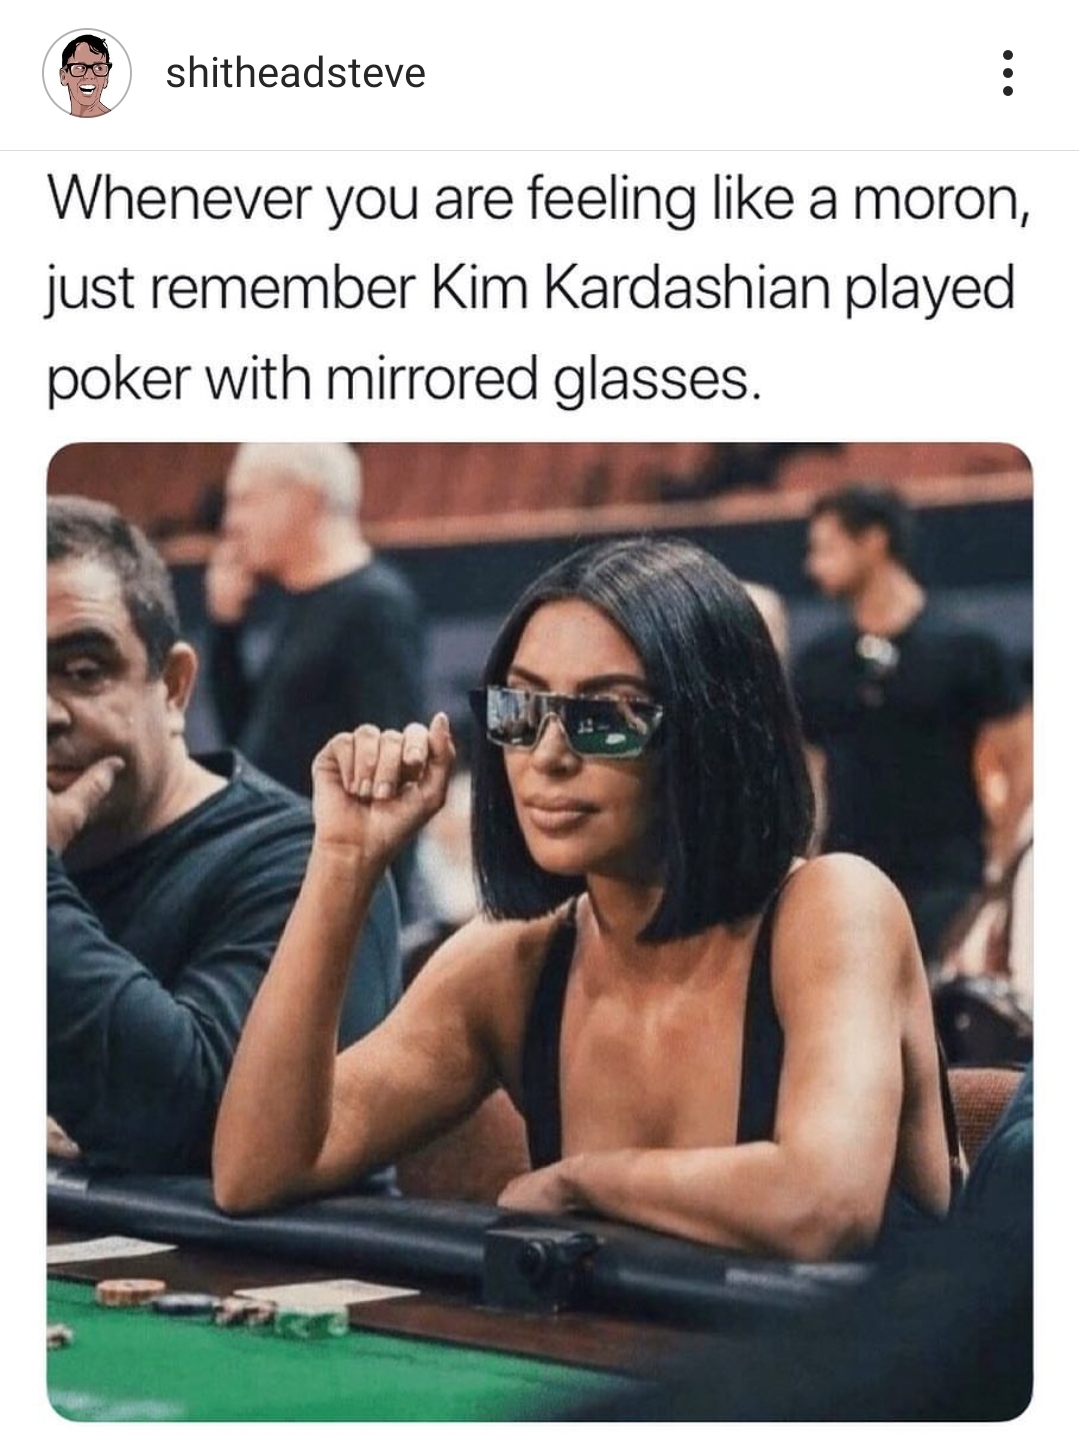 kim k mirrored glasses poker - shitheadsteve Whenever you are feeling a moron, just remember Kim Kardashian played poker with mirrored glasses.